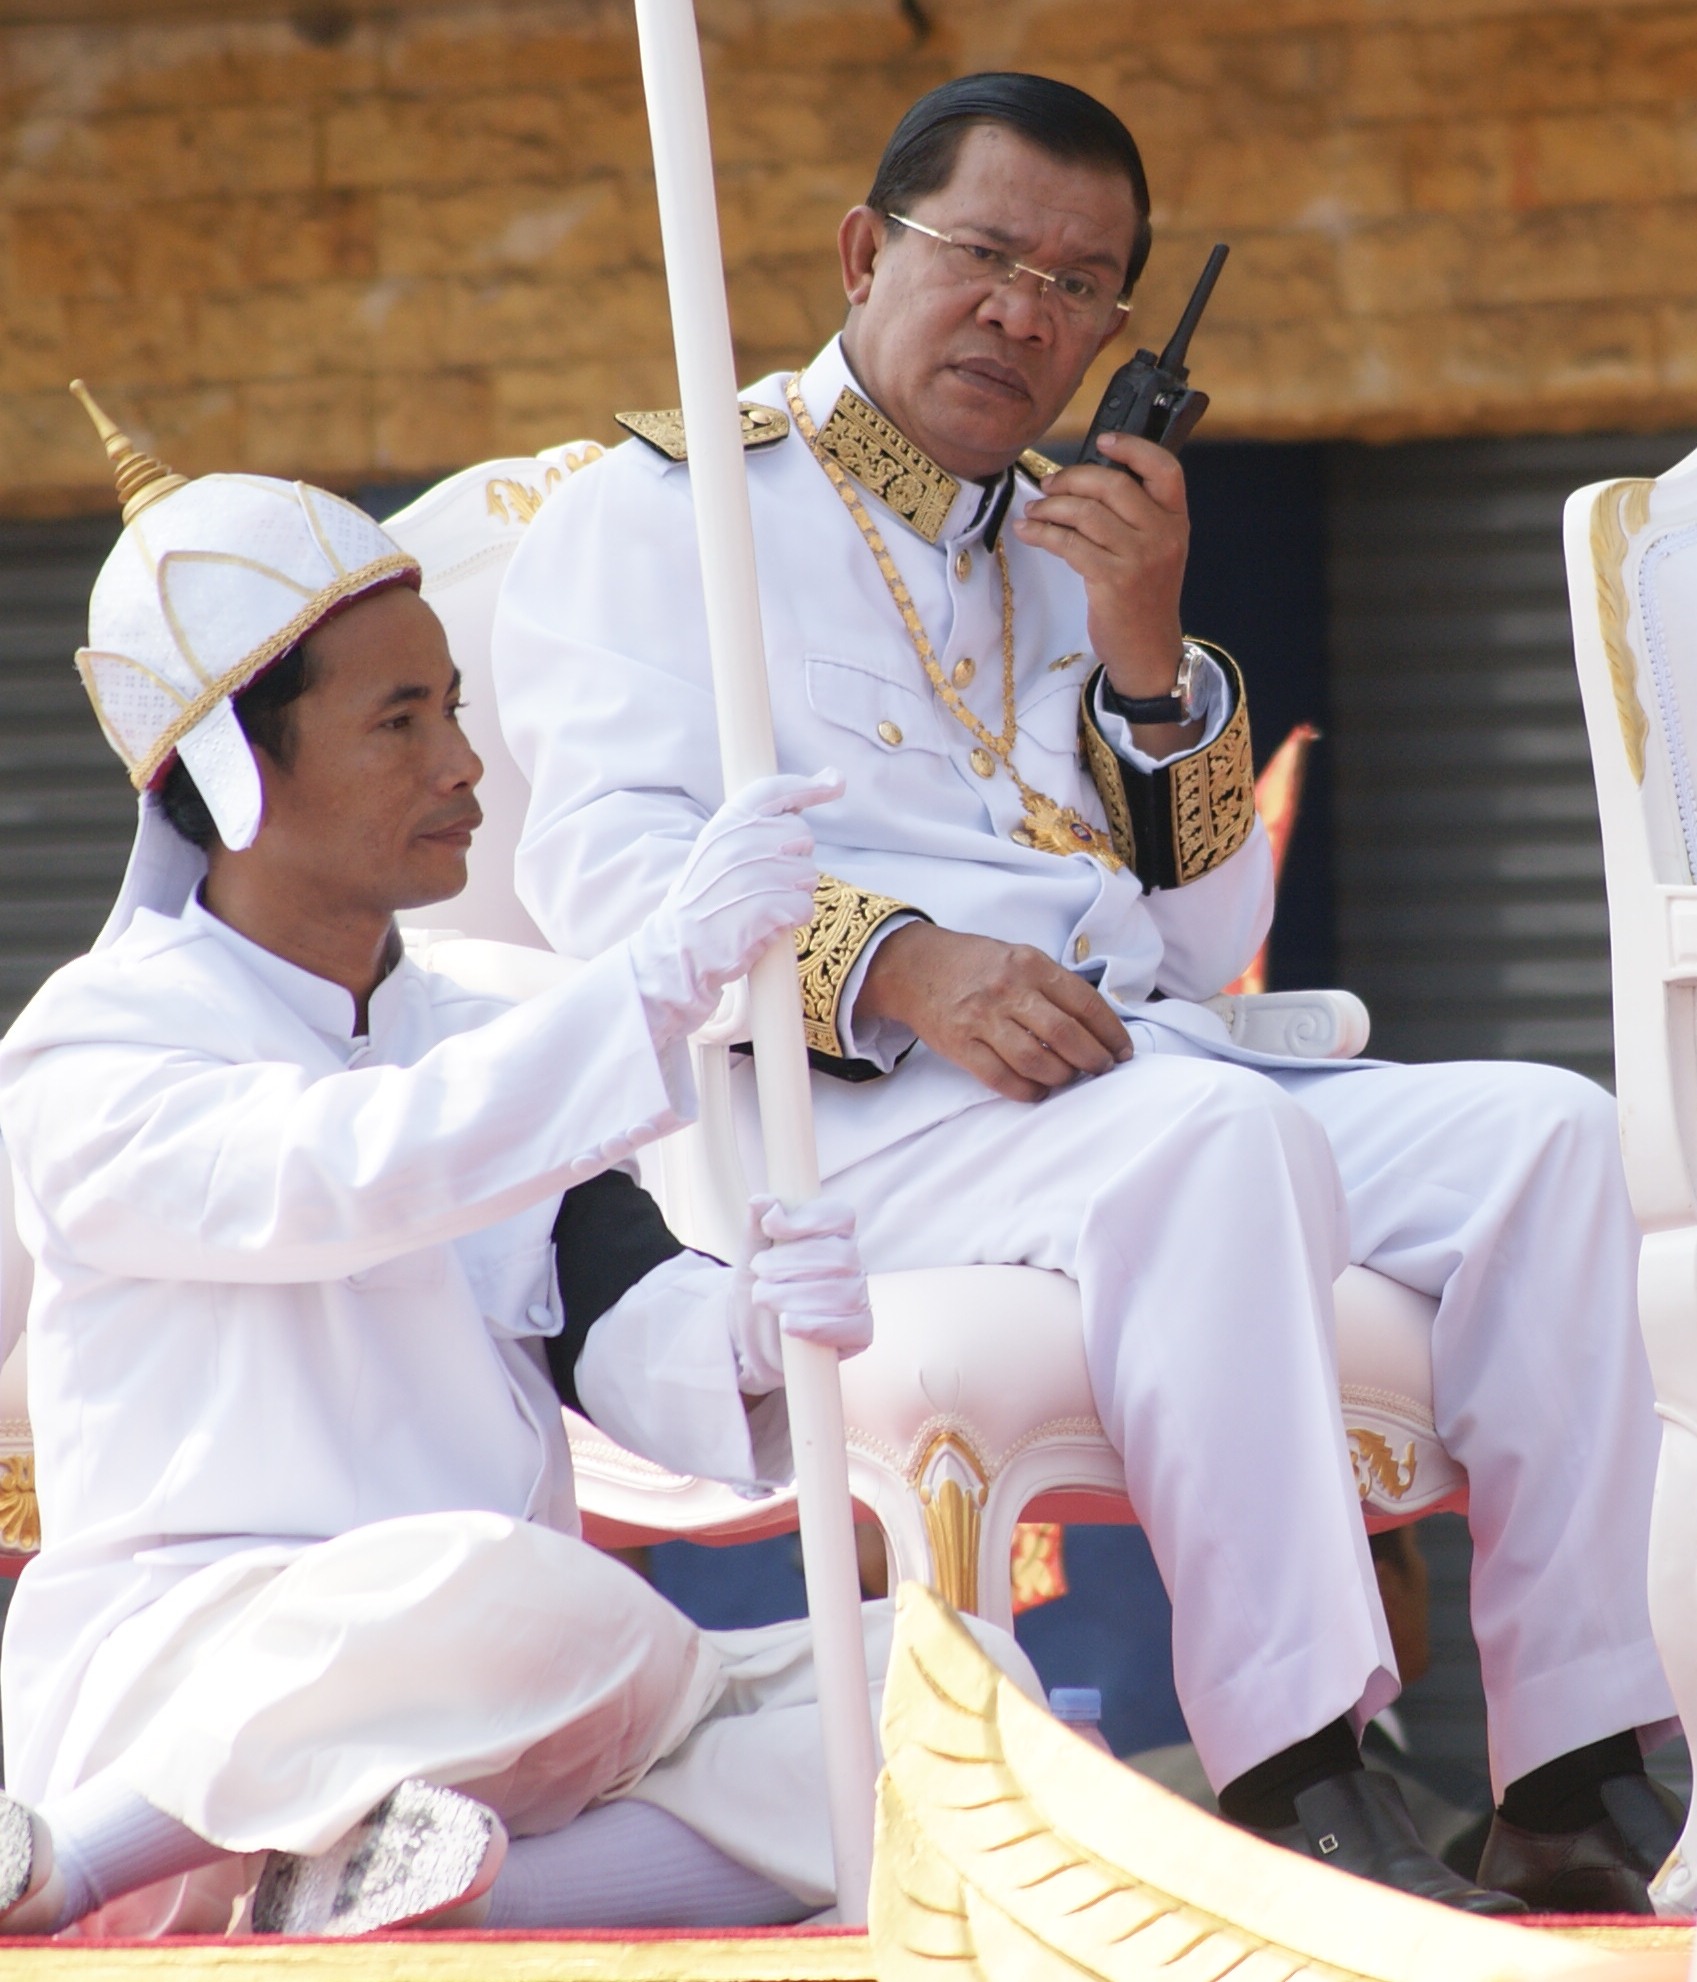 Cambodian Prime Minister Hun Sen Keeps his ears on I-com (2-way police radio) during the procession of Cambodia’s King Father Norodom Sihanouk’s Funeral on Feb 1. (Photo: Chhay Sophal)